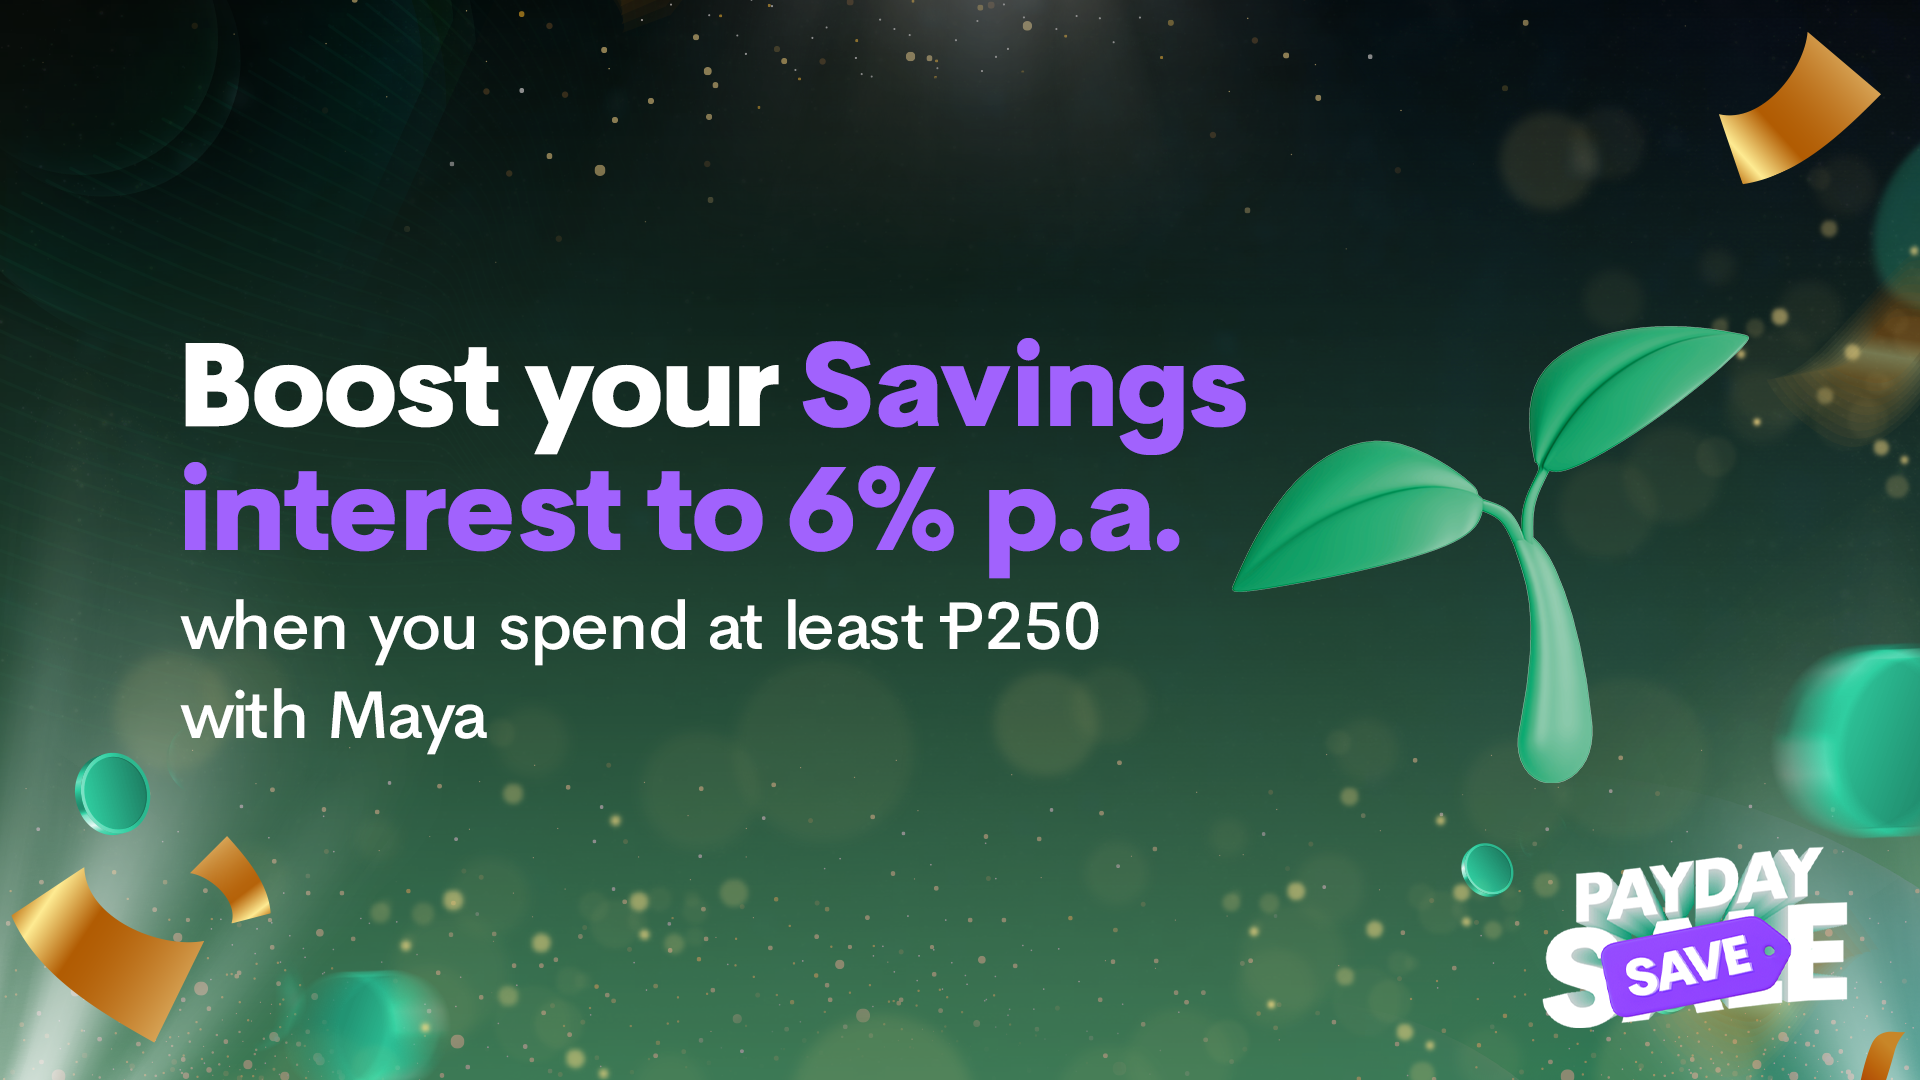 Boost your interest to 6% with Maya Savings when you pay with Maya